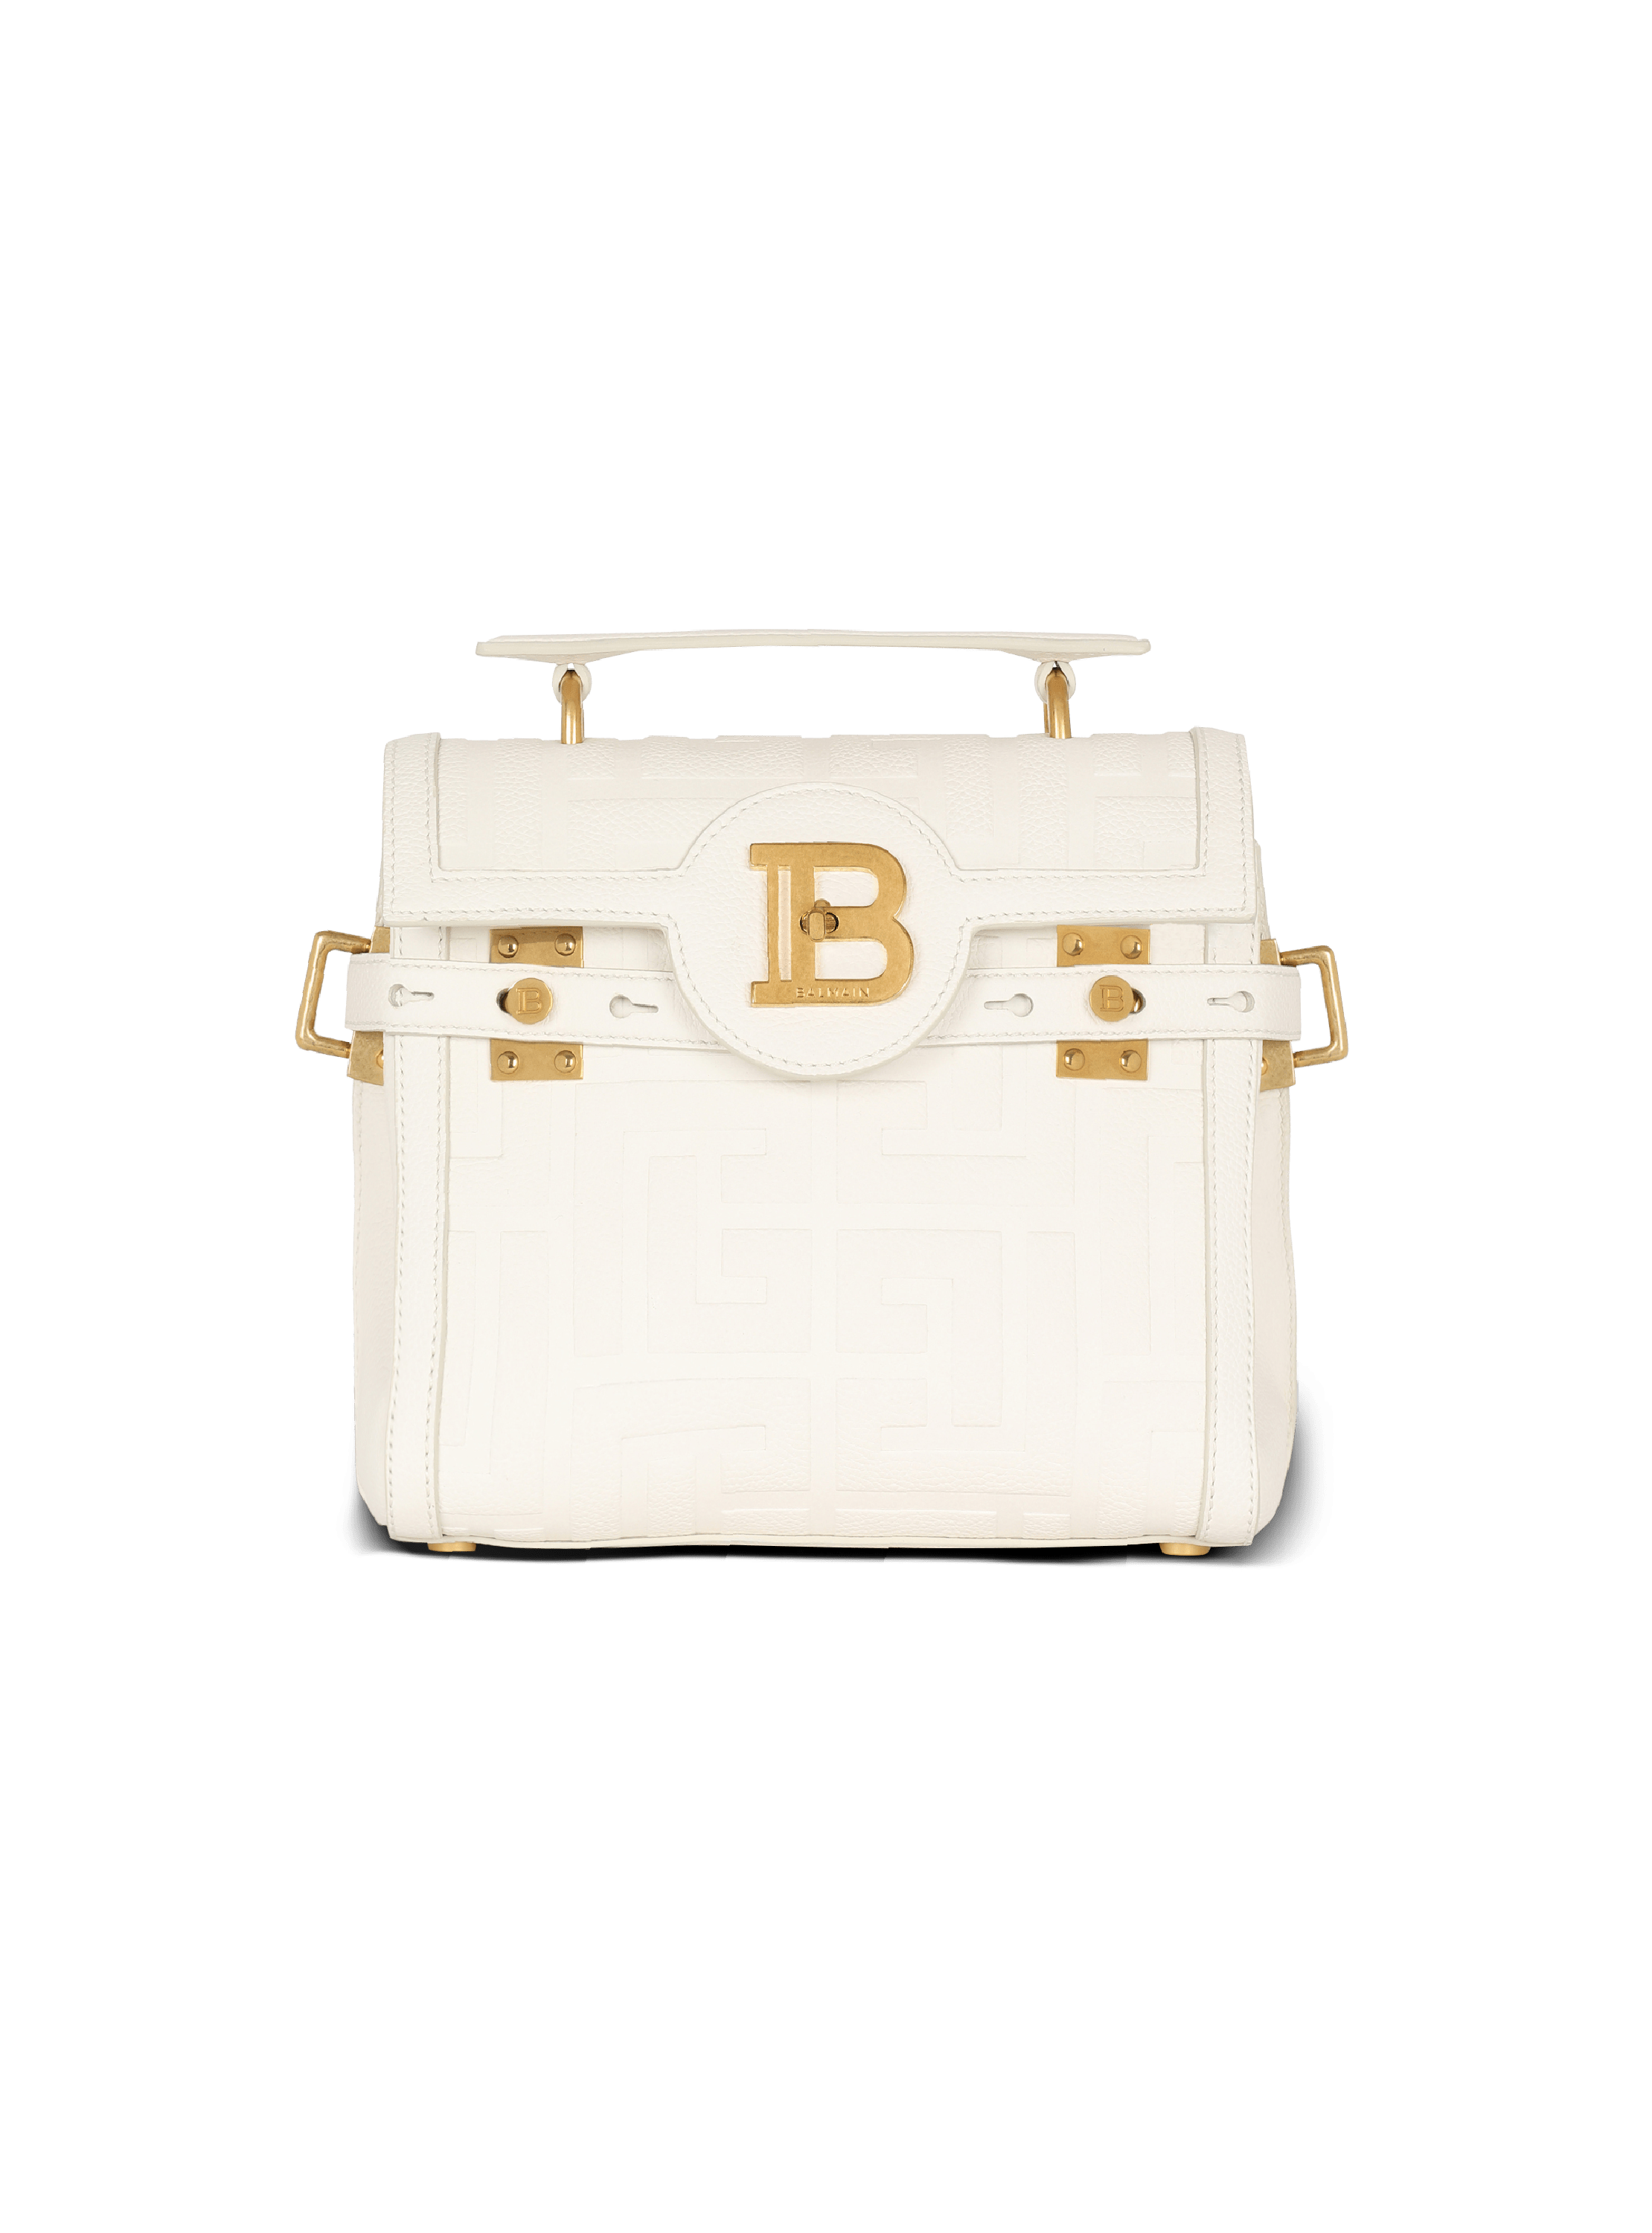 B-Buzz 23 monogrammed grained leather bag